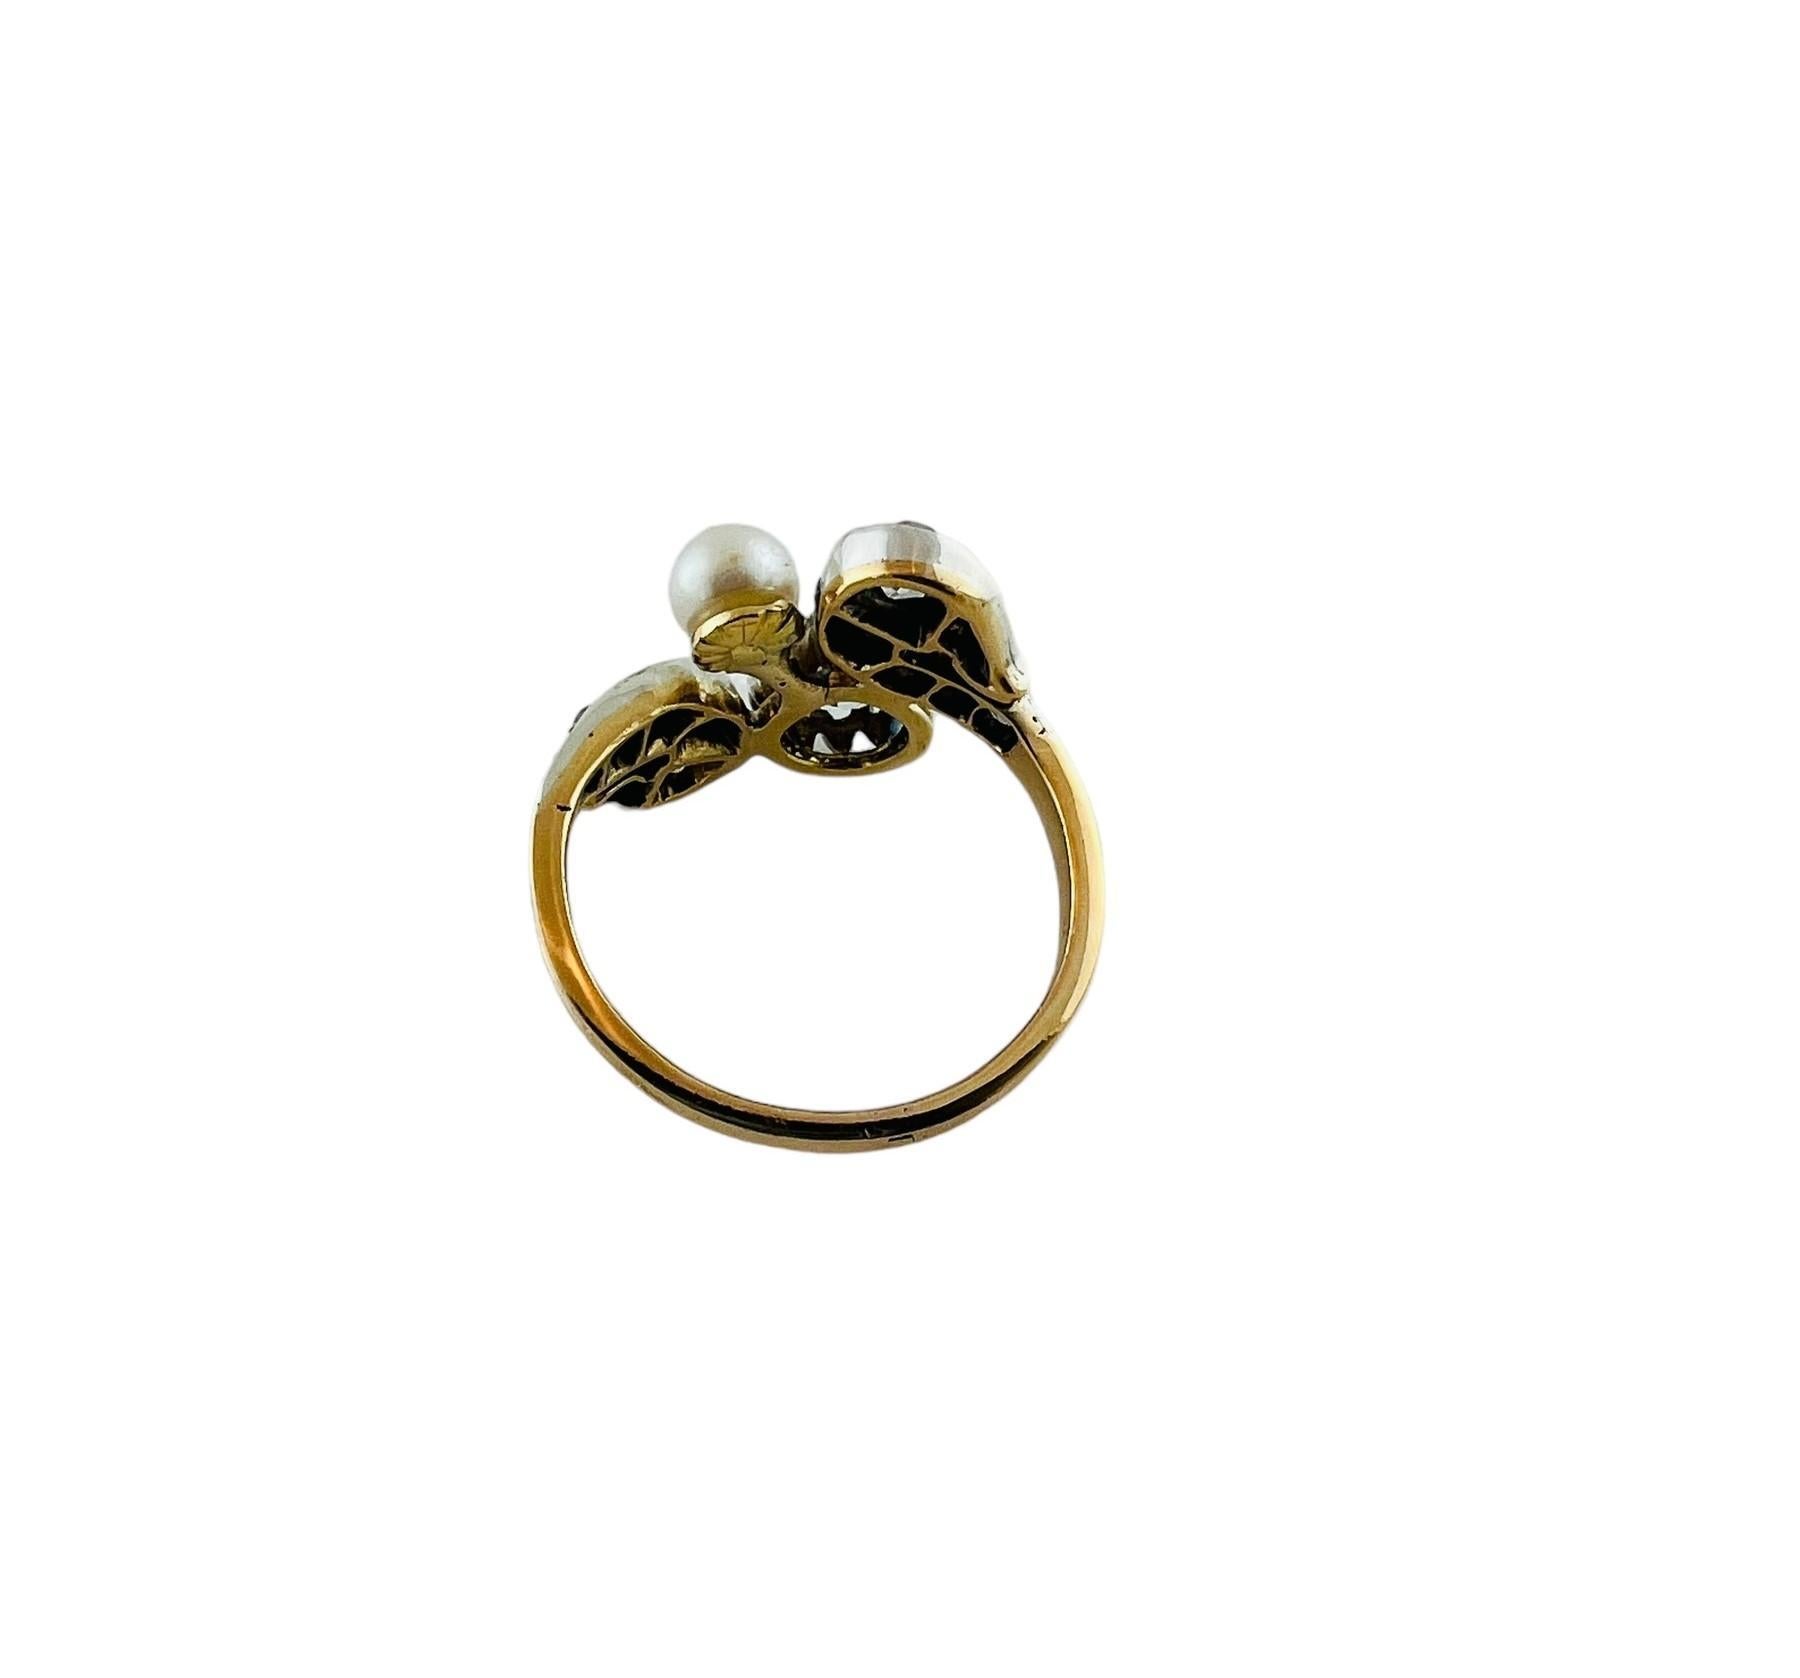 Vintage 14K Yellow and White Gold Diamond and Pearl Ring 1.80cttw #16585 In Good Condition For Sale In Washington Depot, CT